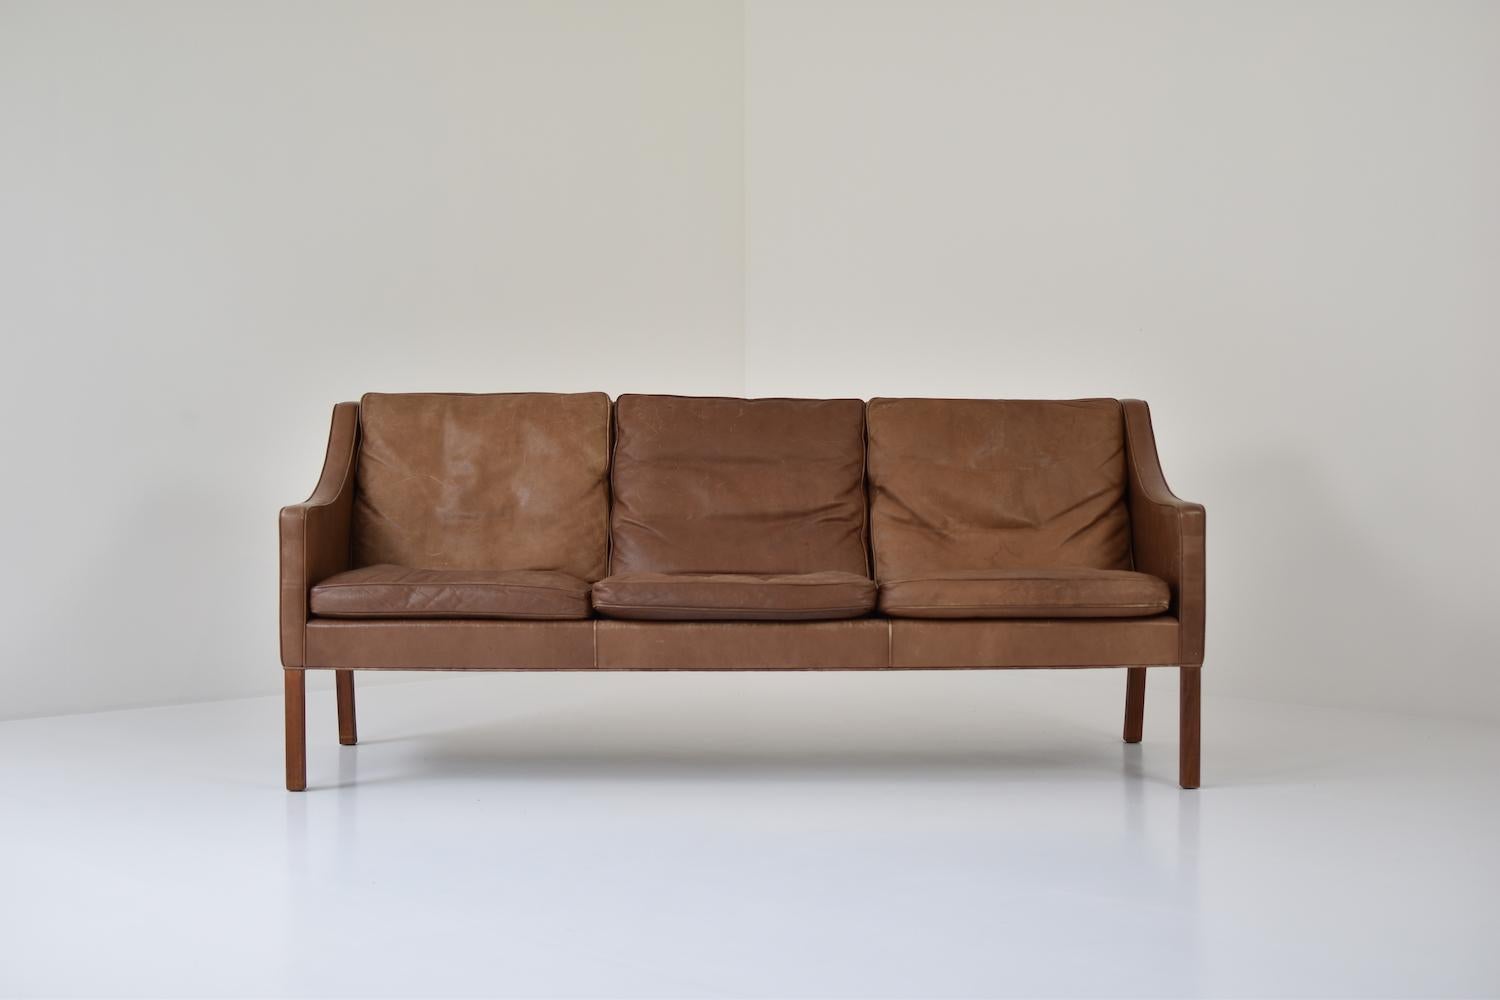 Stunning patinated leather three-seat by Børge Mogensen for Fredericia, Denmark 1960s. This is Model 2209 and features the original cognac brown leather upholstery which is beautifully been patinated over the years. Nice curved armrests and back.